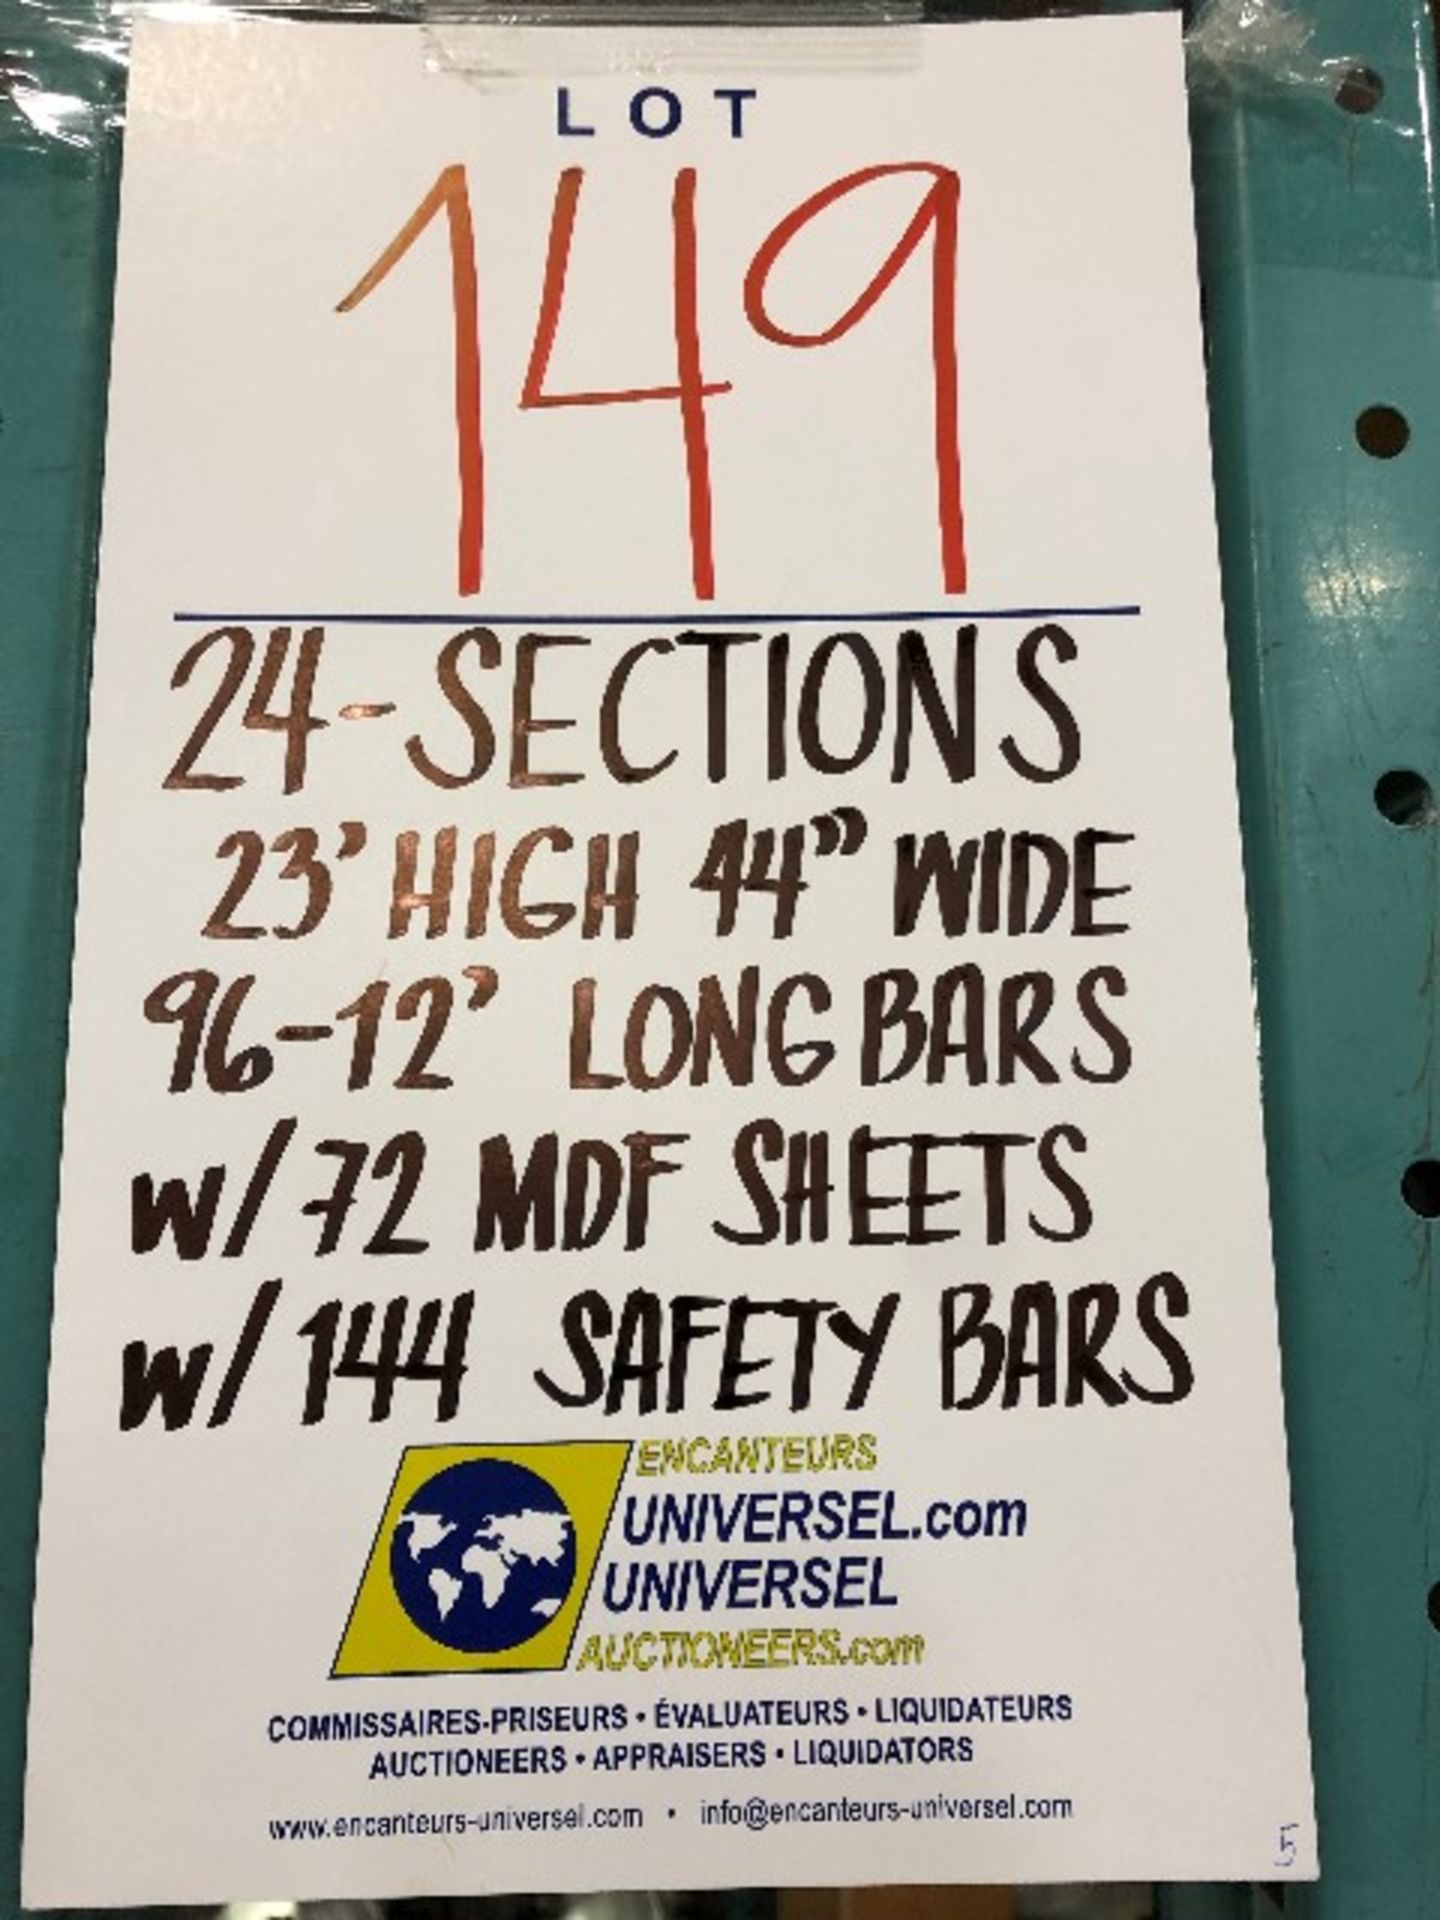 Pallet racking: H.23'xW.44”,96pcs 12'long bars w/72 MDF sheets & 144pcs safety bars,24 sections - Image 3 of 3